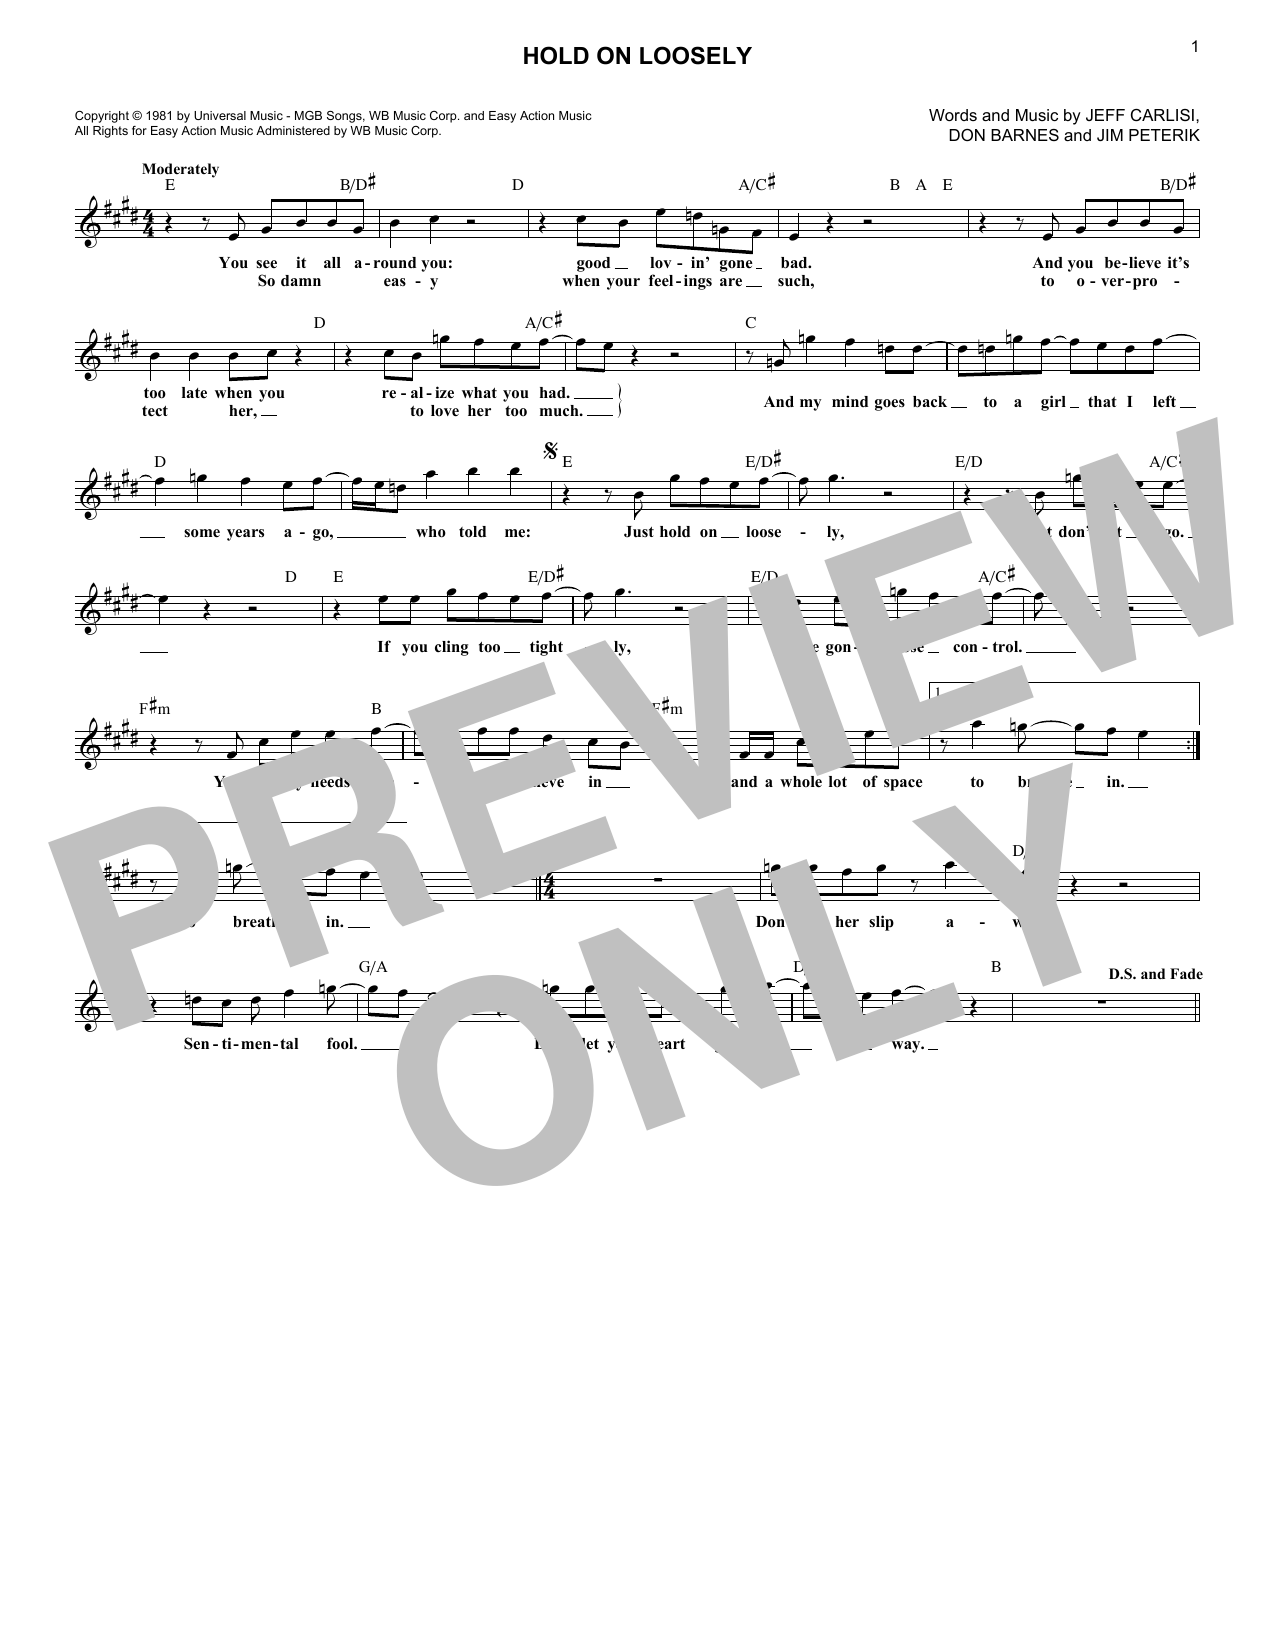 Download 38 Special Hold On Loosely Sheet Music